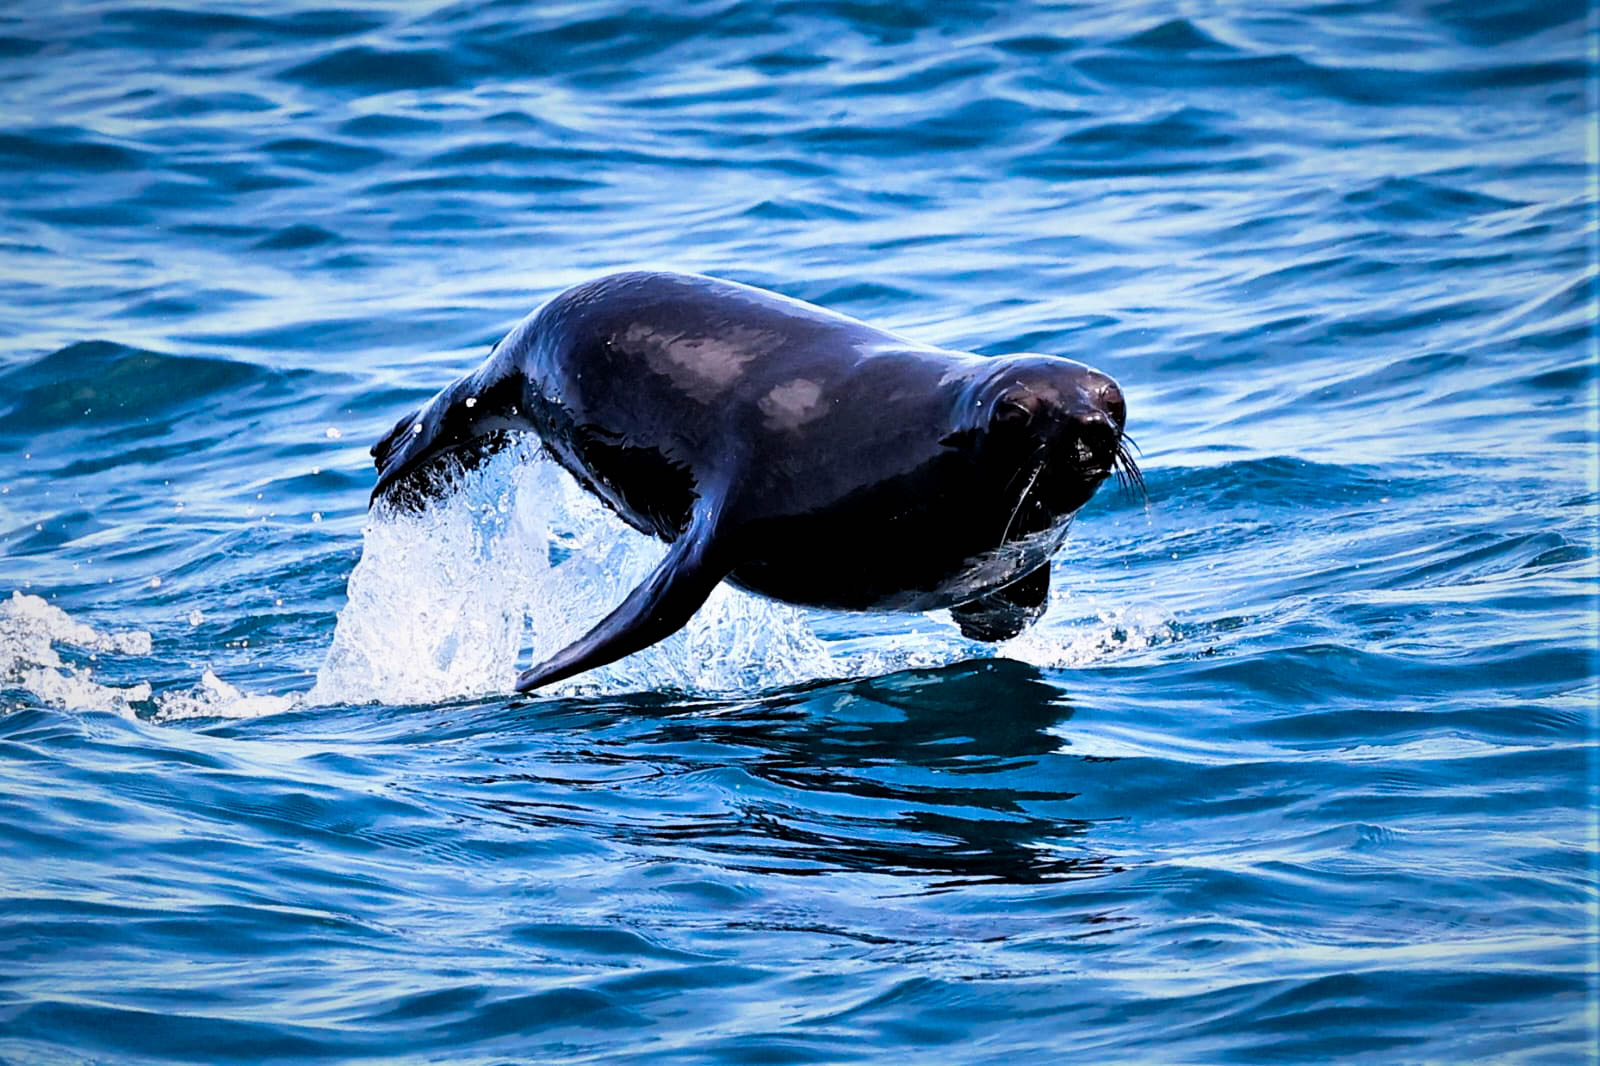 furseal jumping and swimming from the Fox II